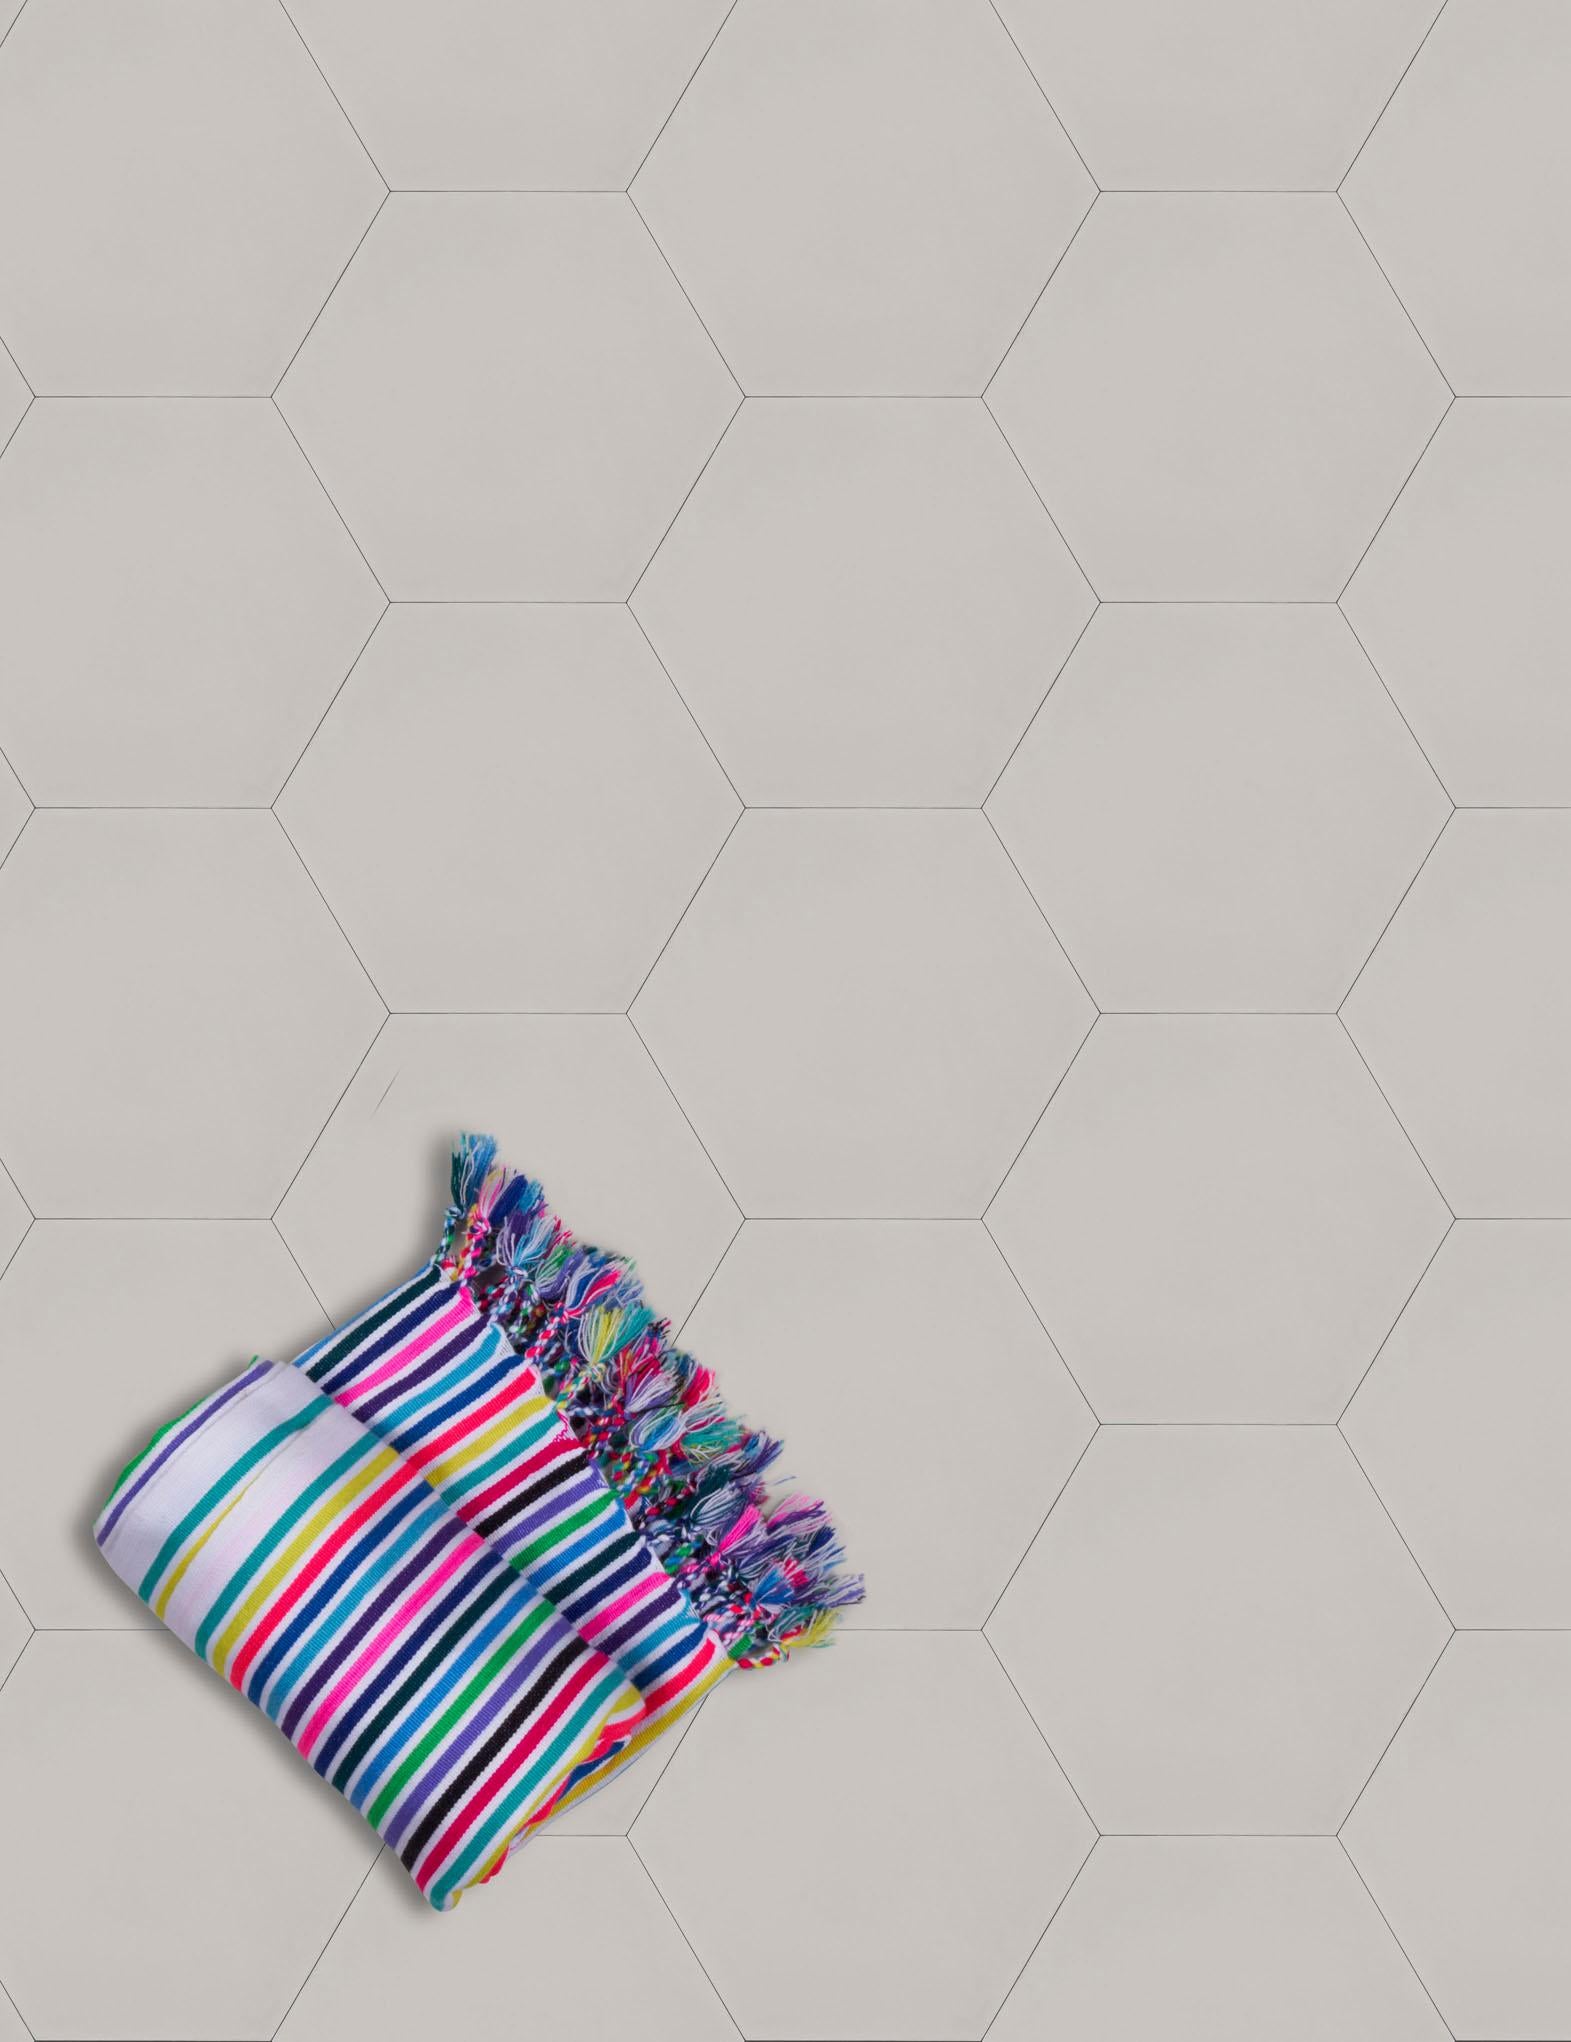 Available in our full palette in both cement and ceramic tile, these solid-shade hexagonal tiles can stand alone or mix with other colors to create a multicolor surface. They can also be coordinated with our Moon Phase tiles for a calming mix of